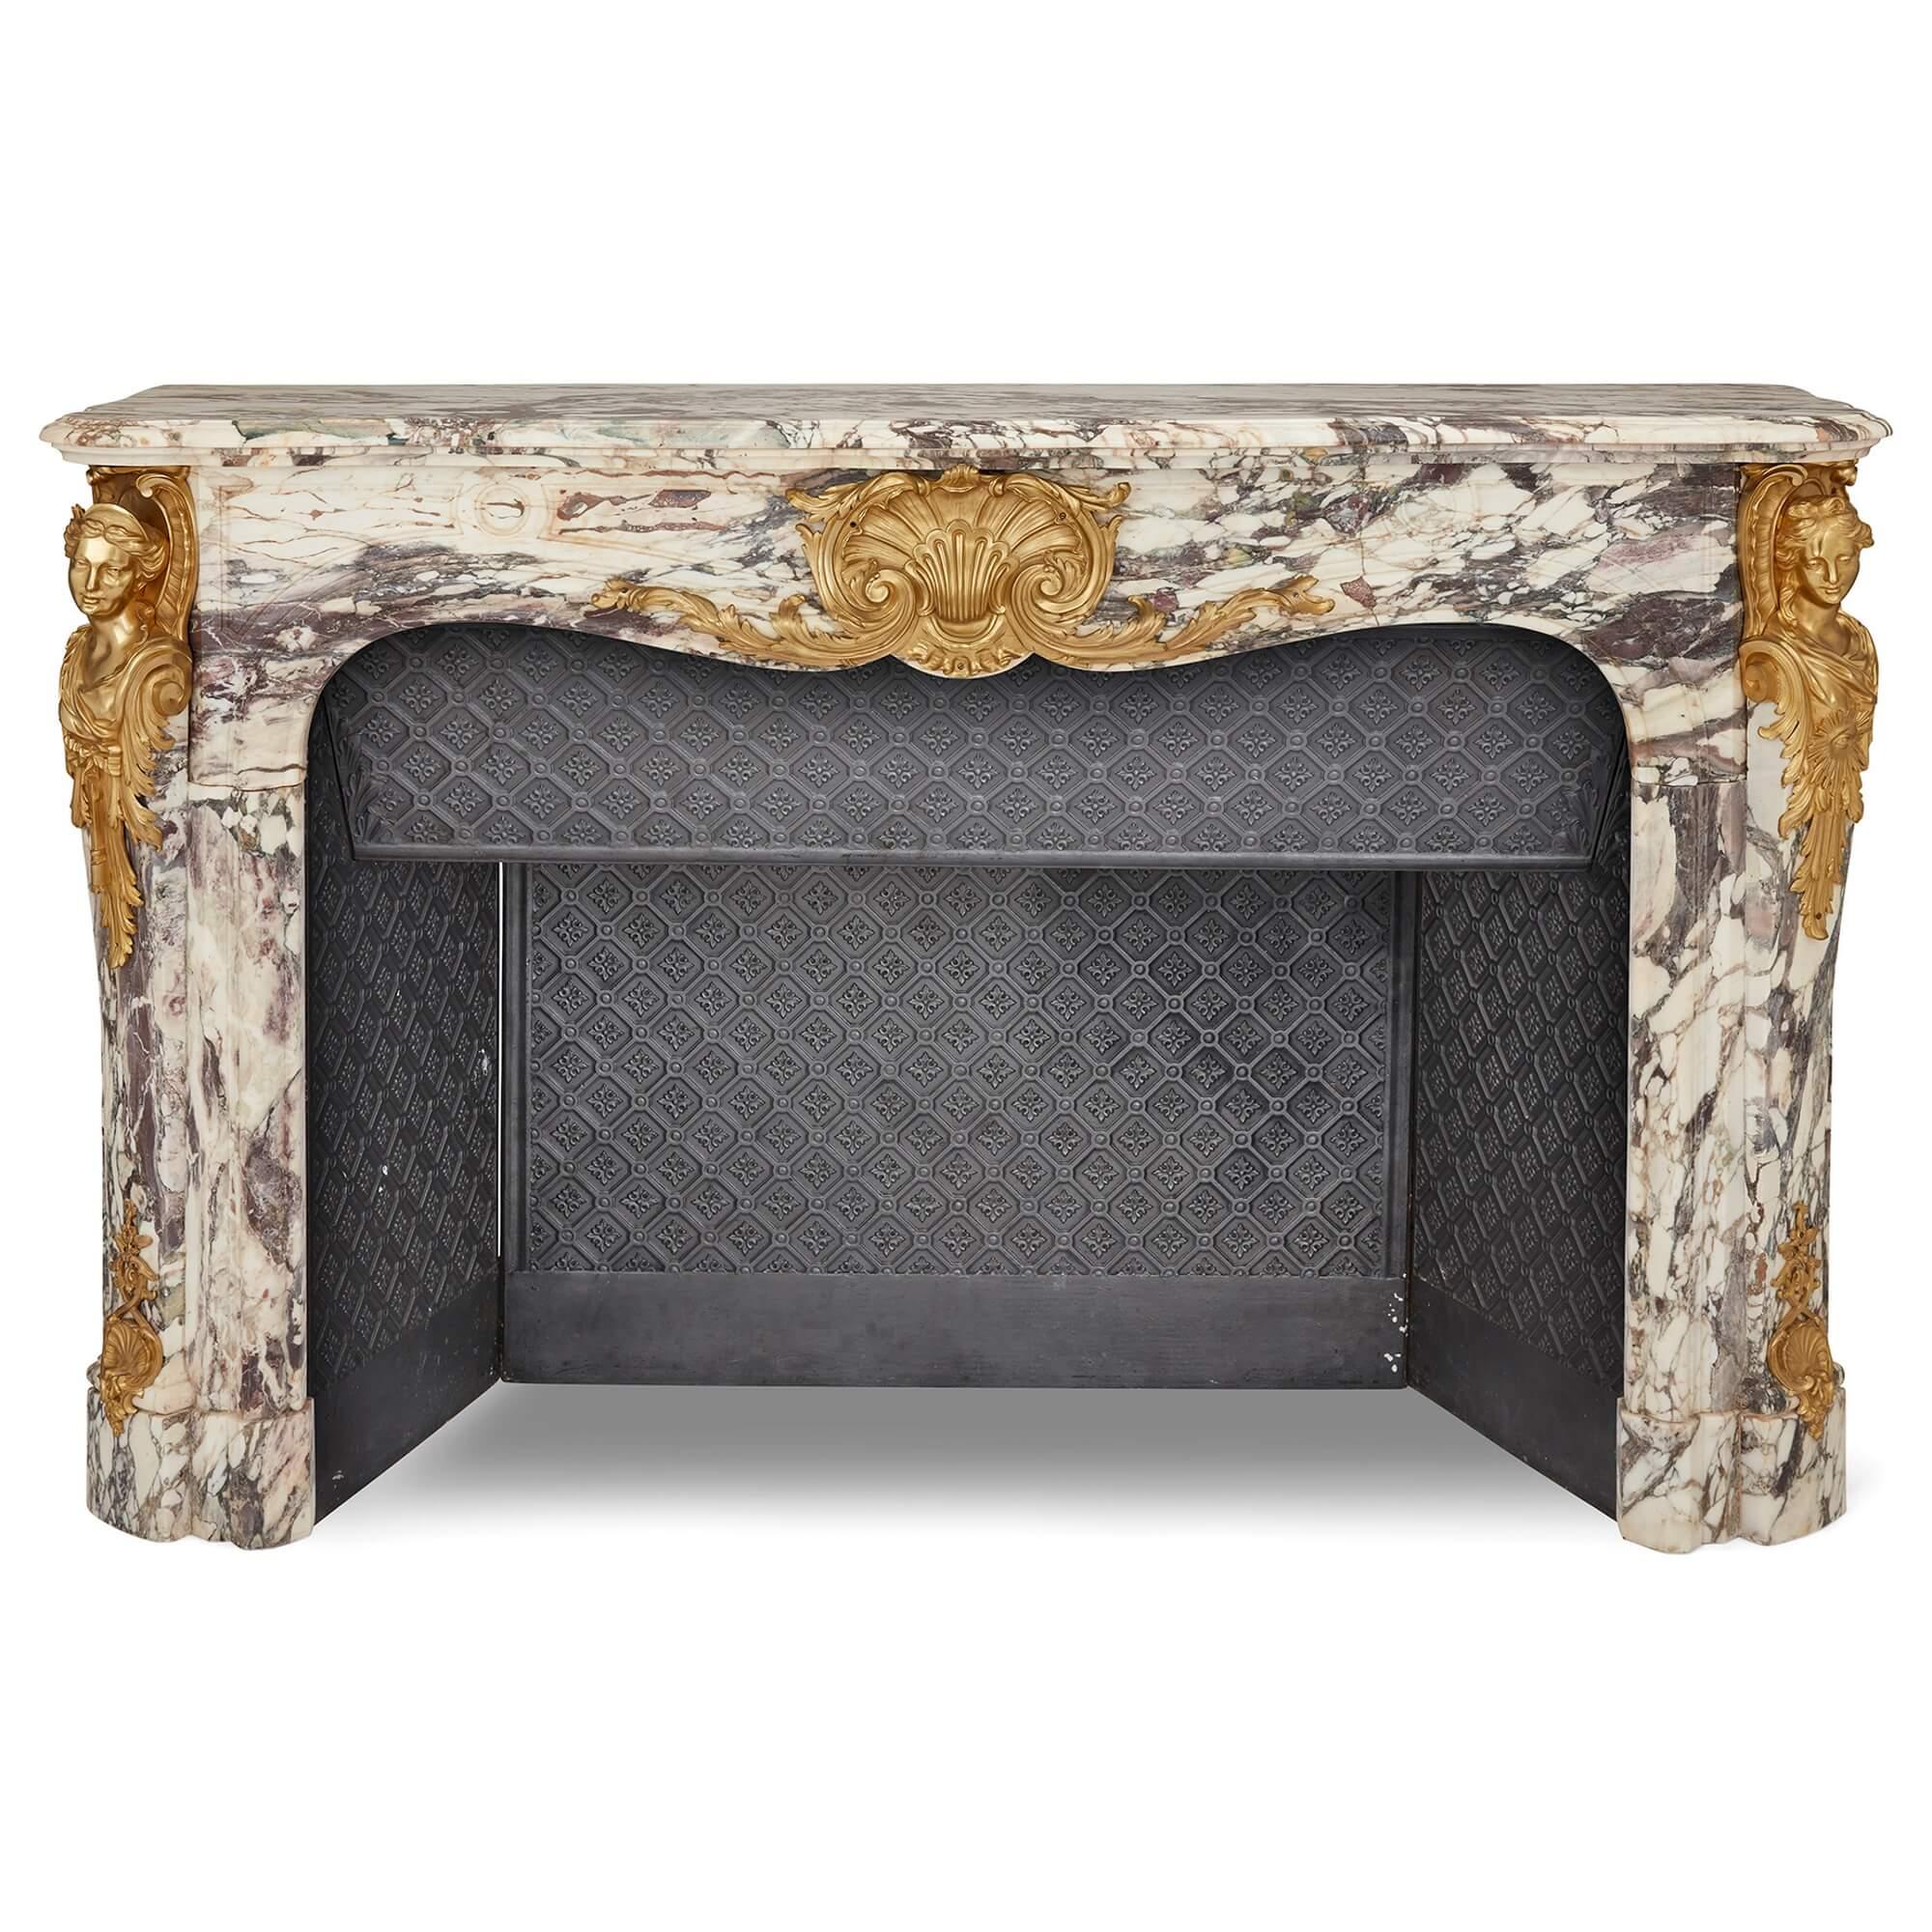 Large Fleur de Pêche marble and ormolu antique fireplace
French, 19th Century 
Height 121cm, width 188cm, depth 63cm

This stunning fireplace combines unusual Fleur de Pêche marble with sculptural ormolu mounts. The fireplace consists of a panelled